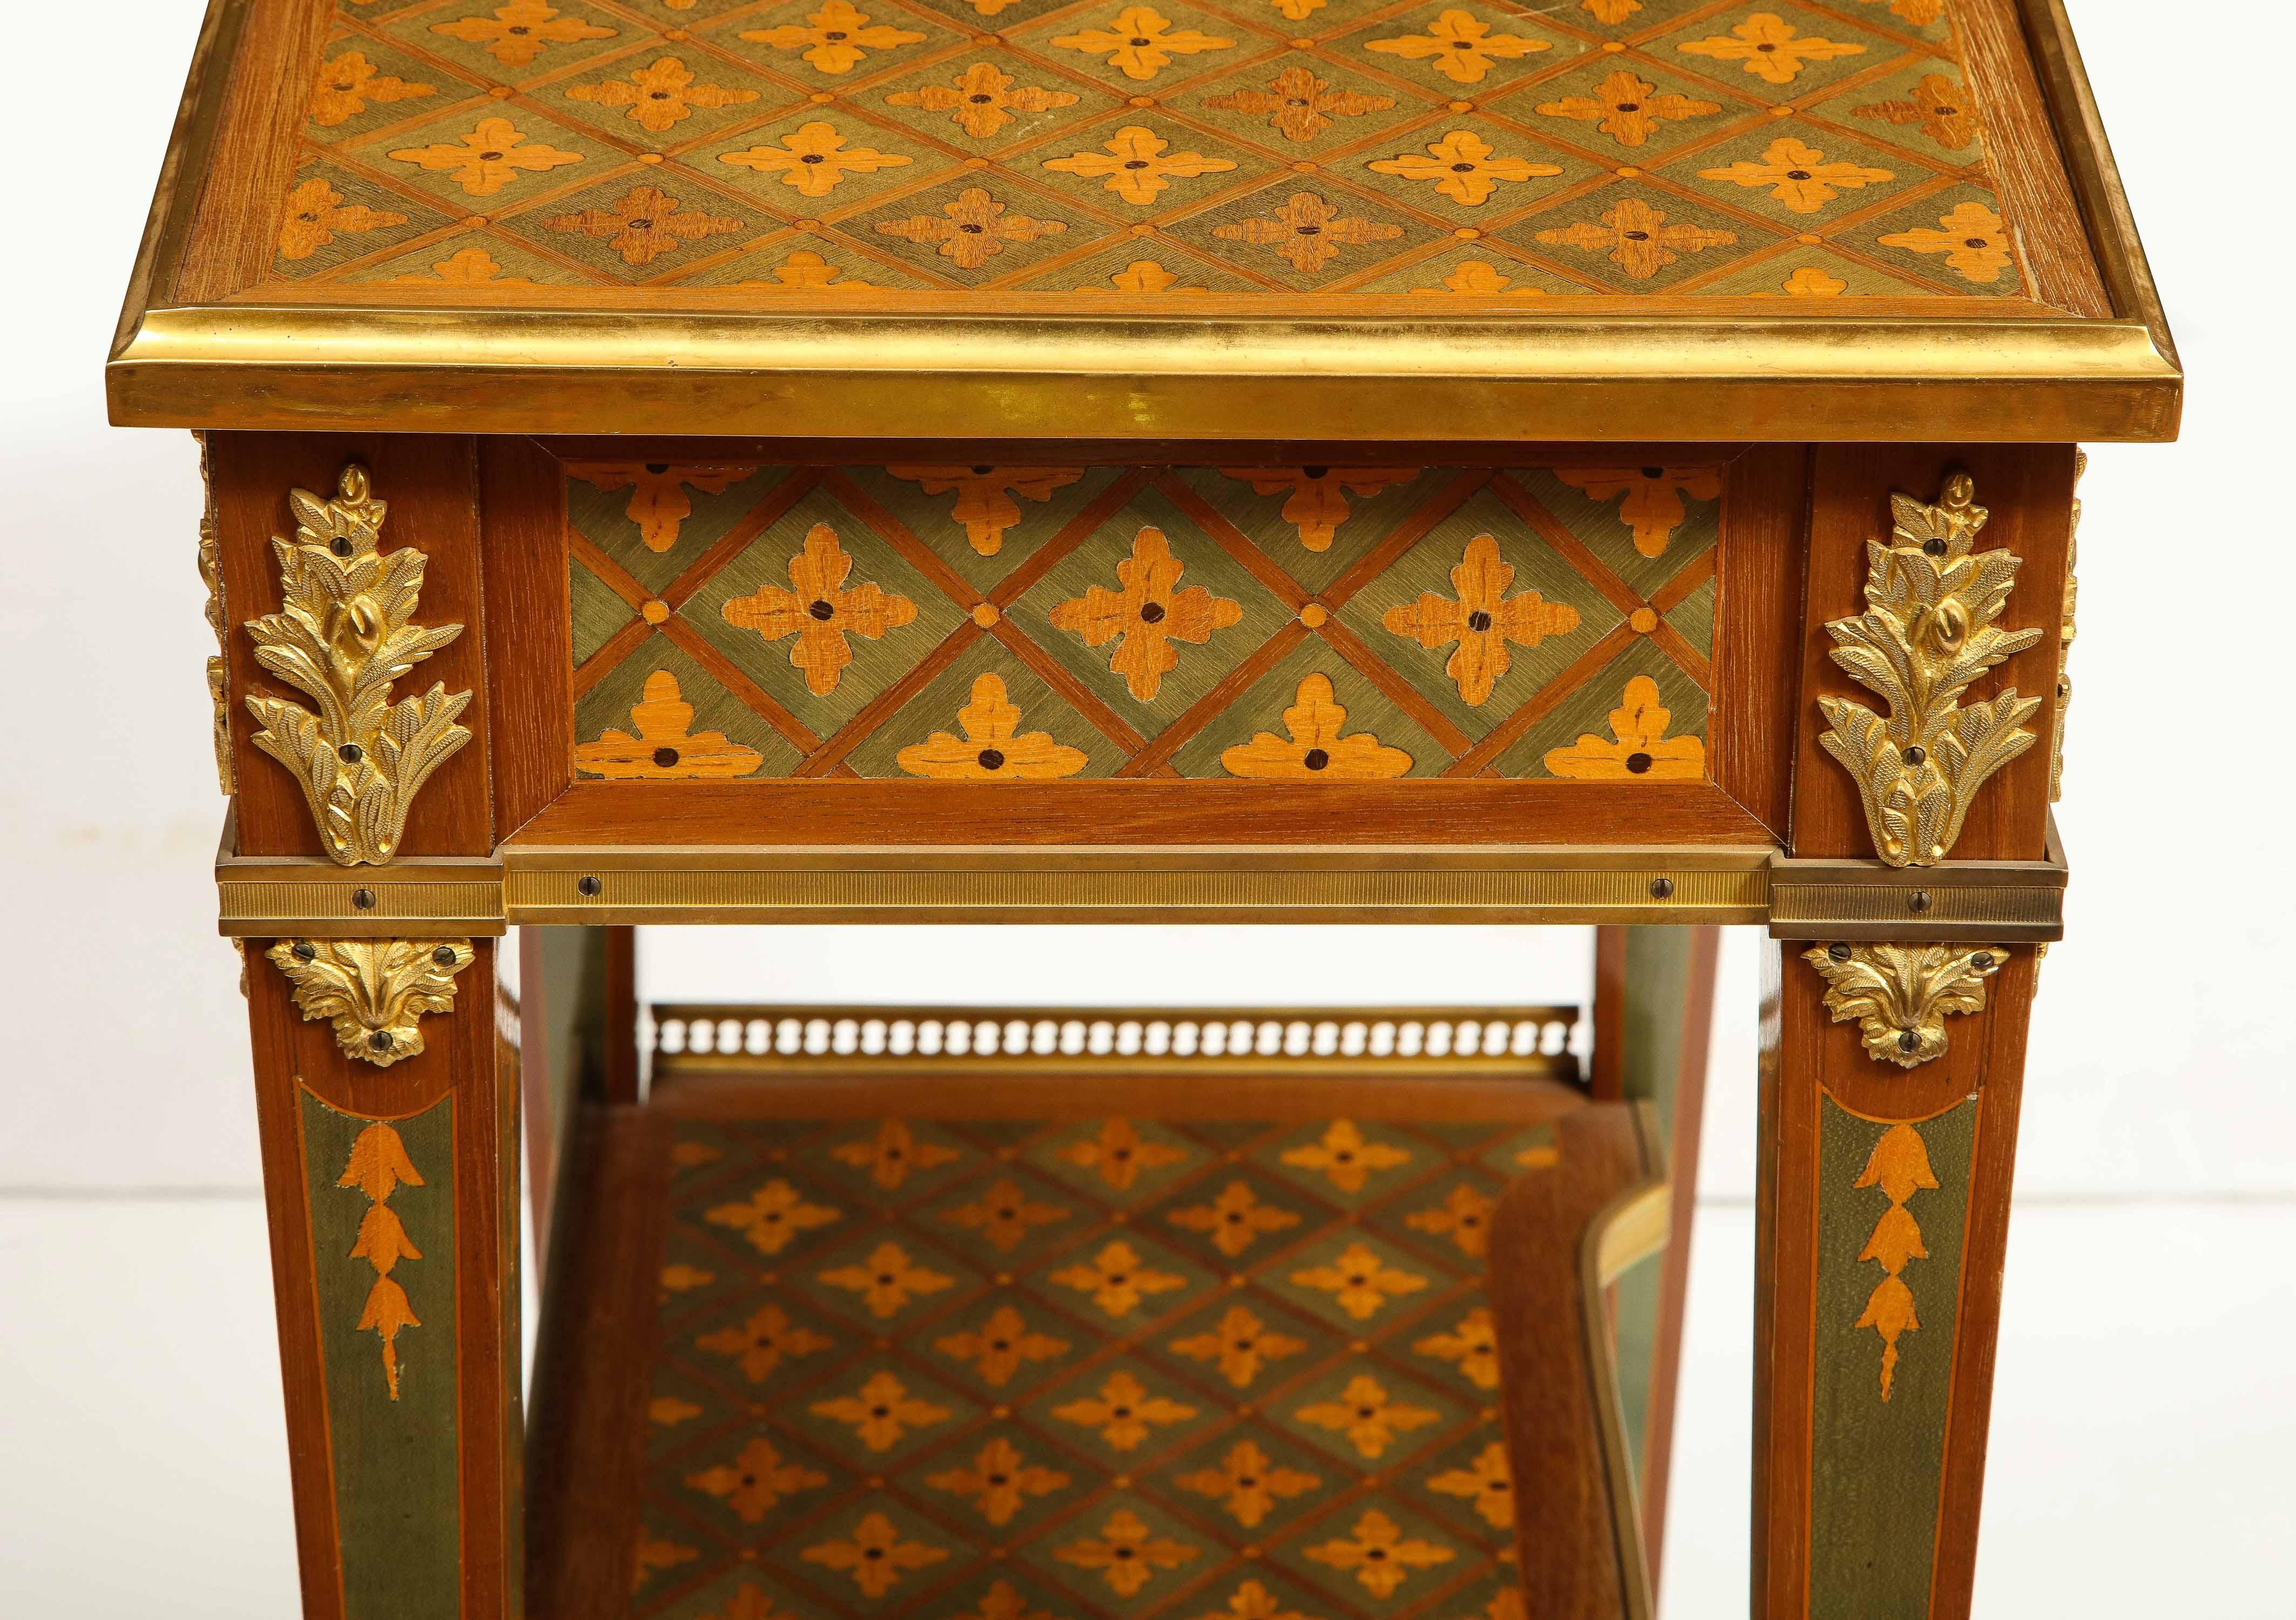 Exceptional Pair of French Ormolu-Mounted Parquetry and Marquetry Side Tables For Sale 12